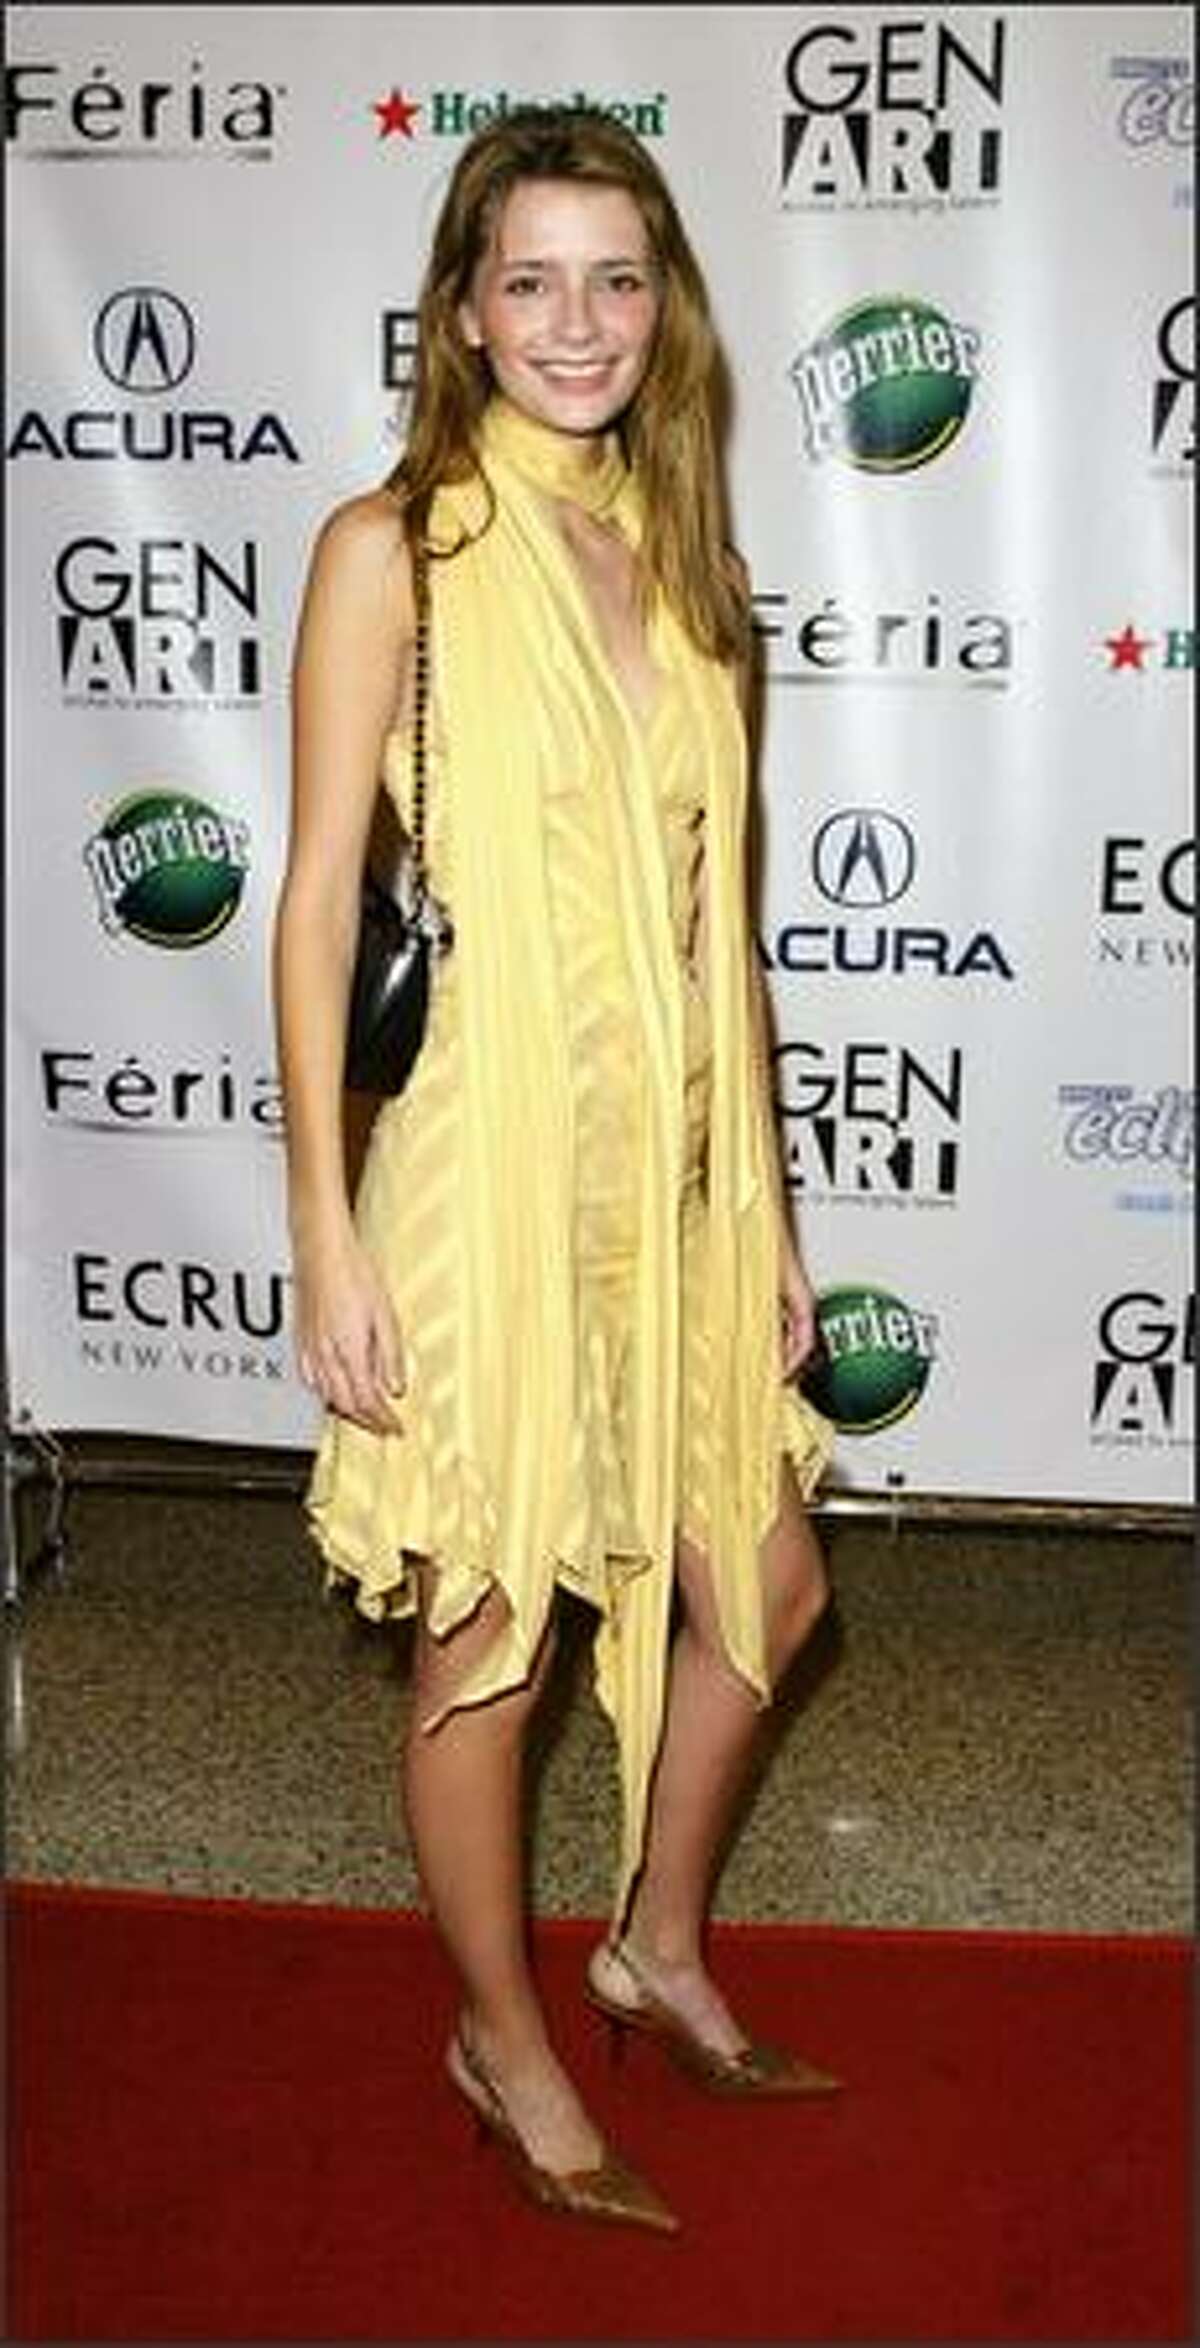 This is the eighth in an occasional series featuring stars and their ever-changing fashion styles. Actress Mischa Barton, 22, arrives at Gen Art Styles 2003 fashion and awards show at the Hammerstein Ballroom in New York, April 22, 2003.